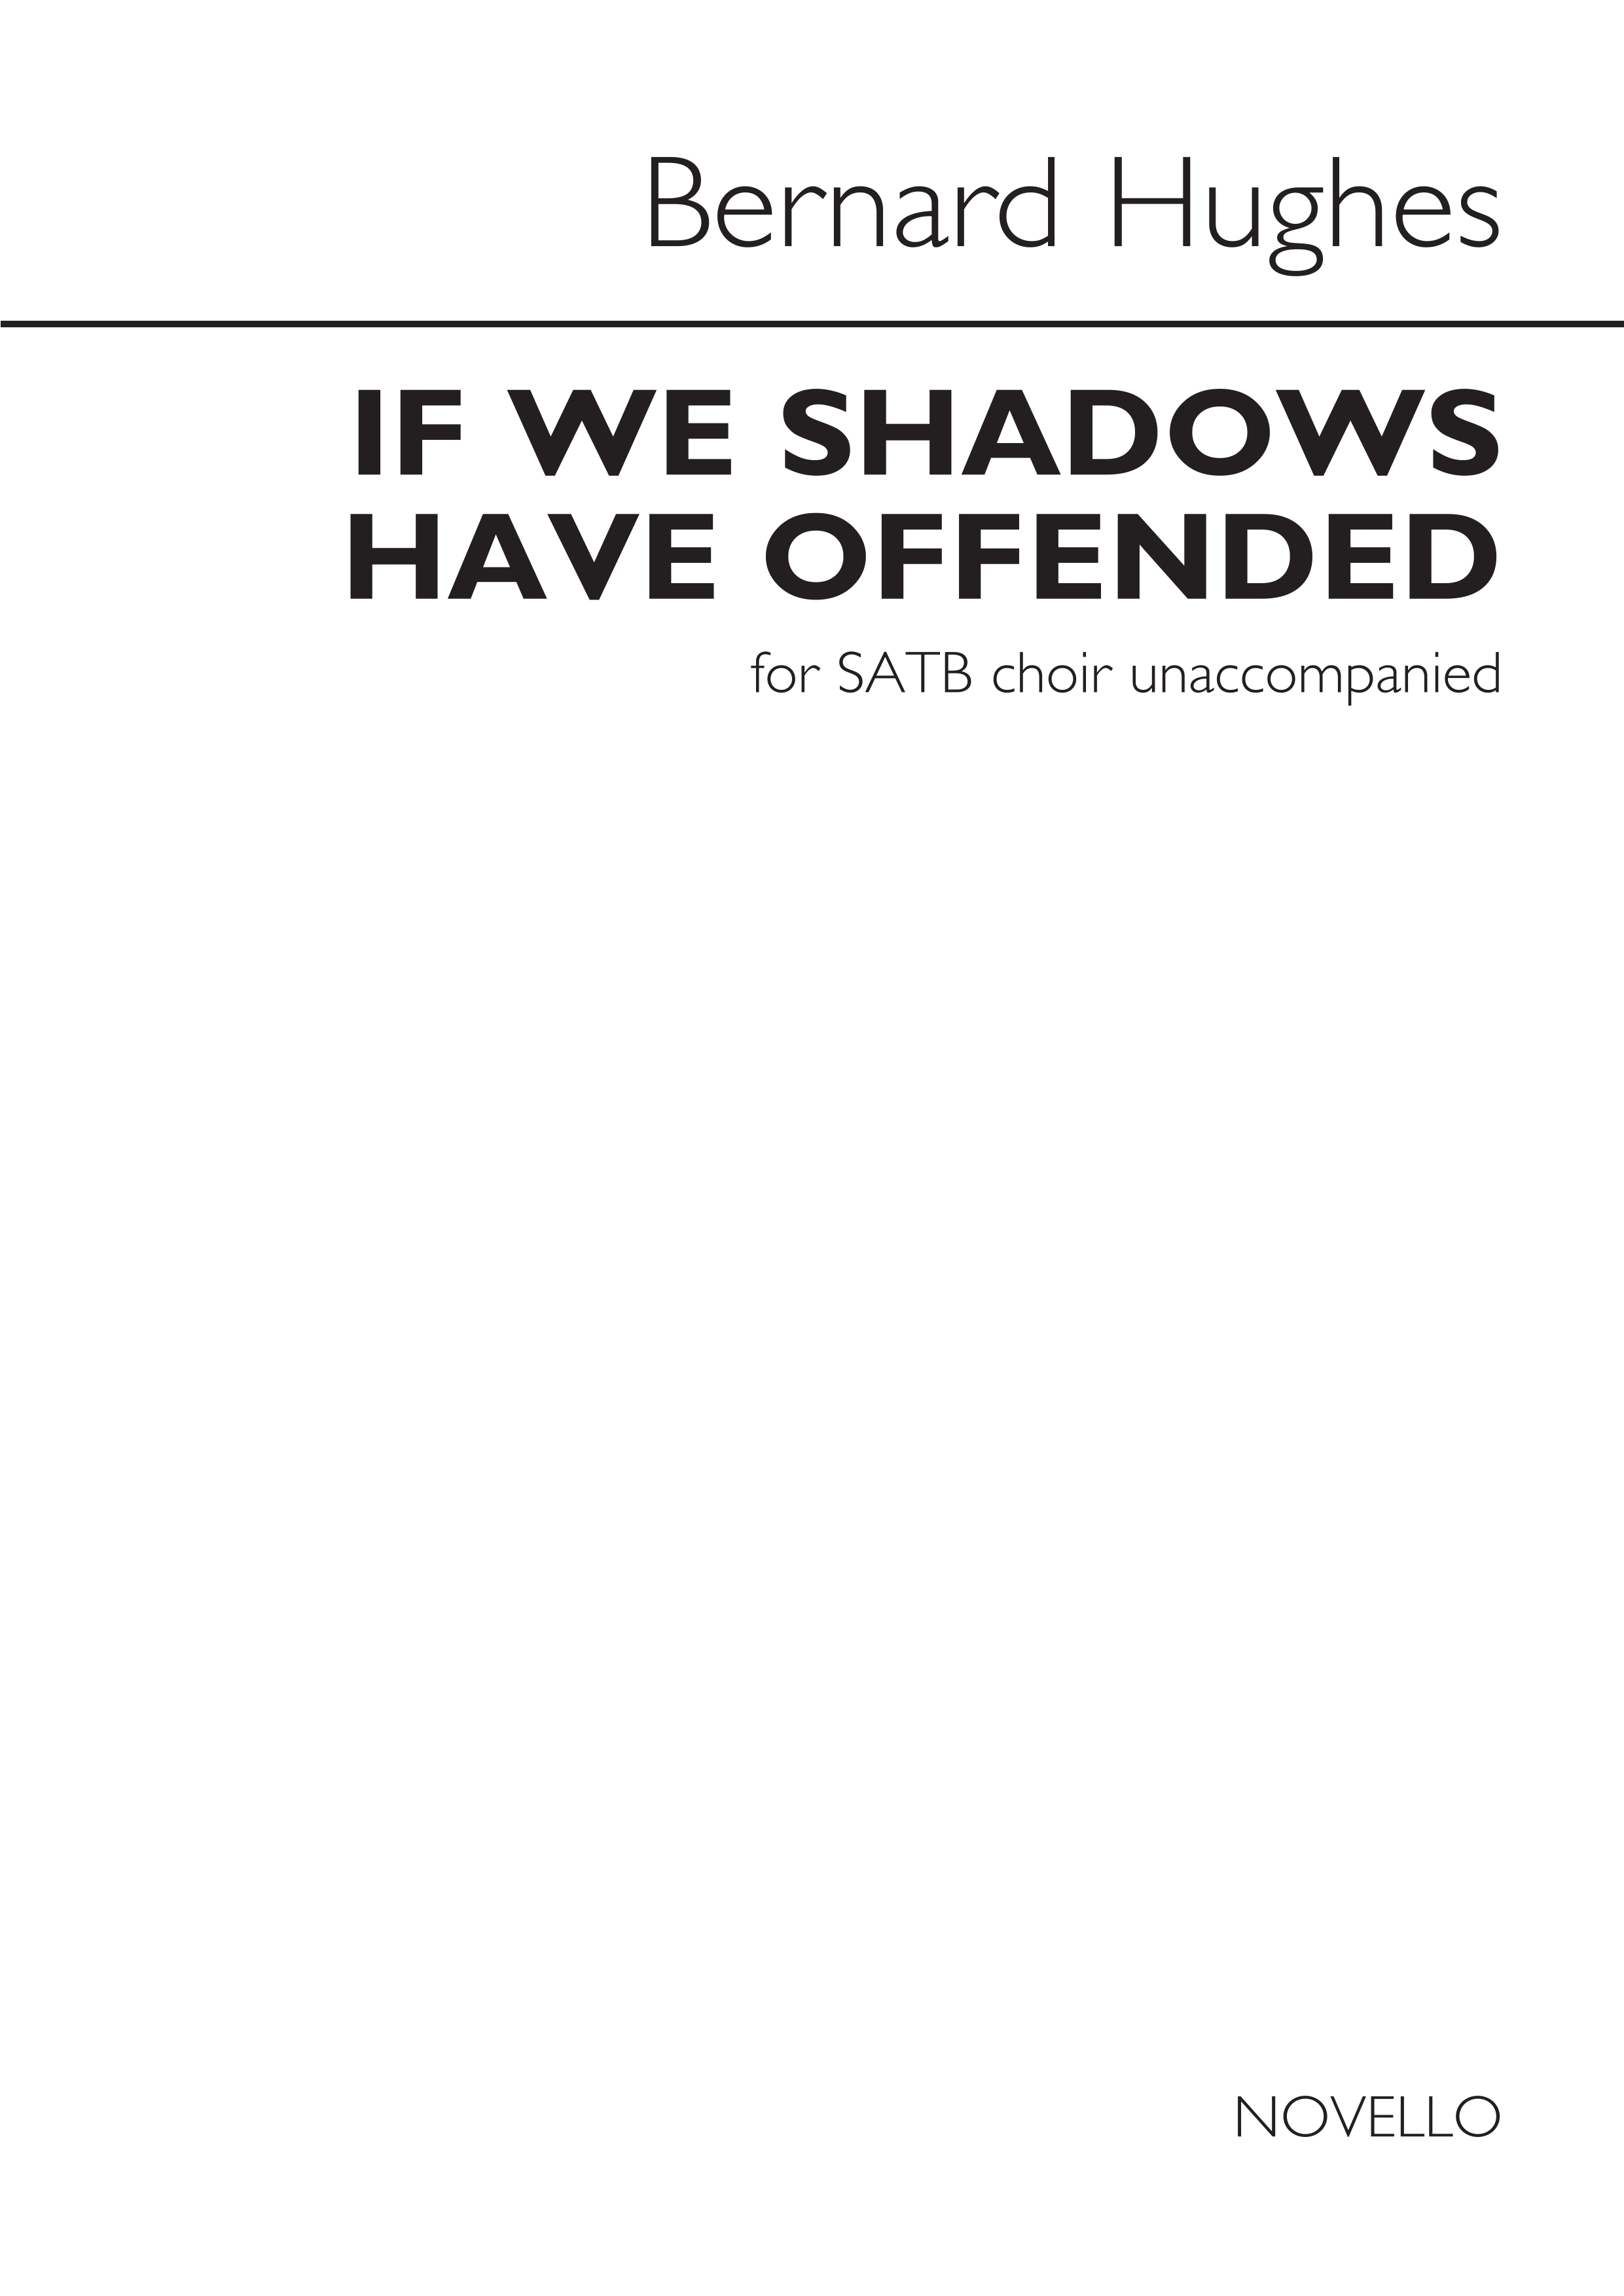 Bernard Hughes: If we shadows have offended: SATB: Vocal Score